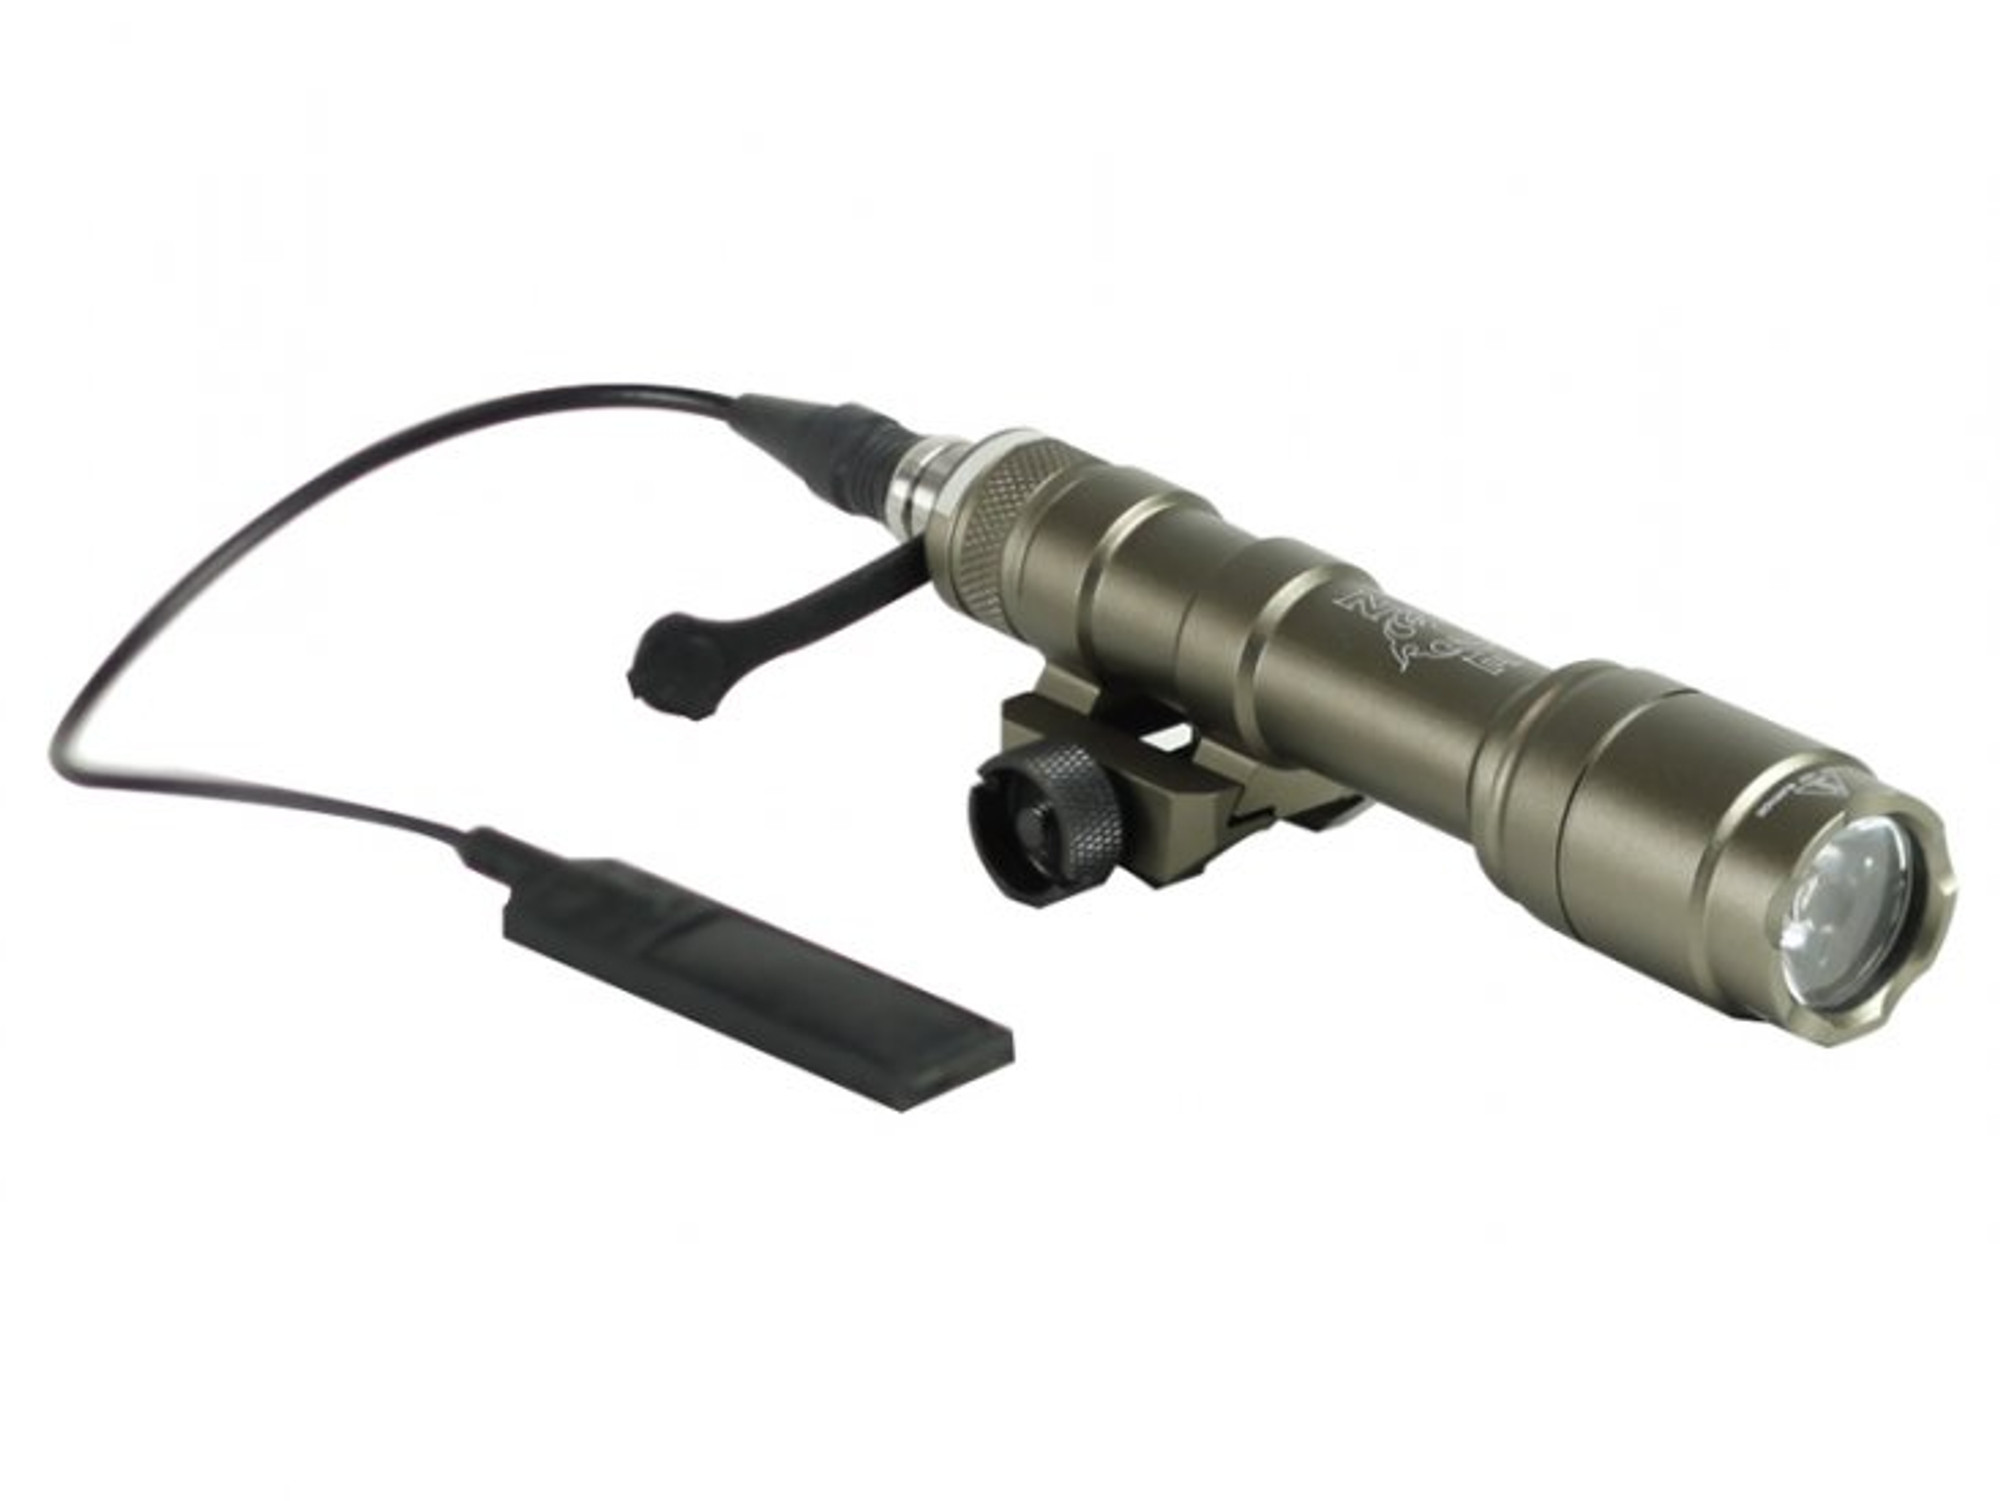 Bravo Airsoft Full Size Scout Tactical Flashlight w/ Pressure Pad and Mount - Dark Earth